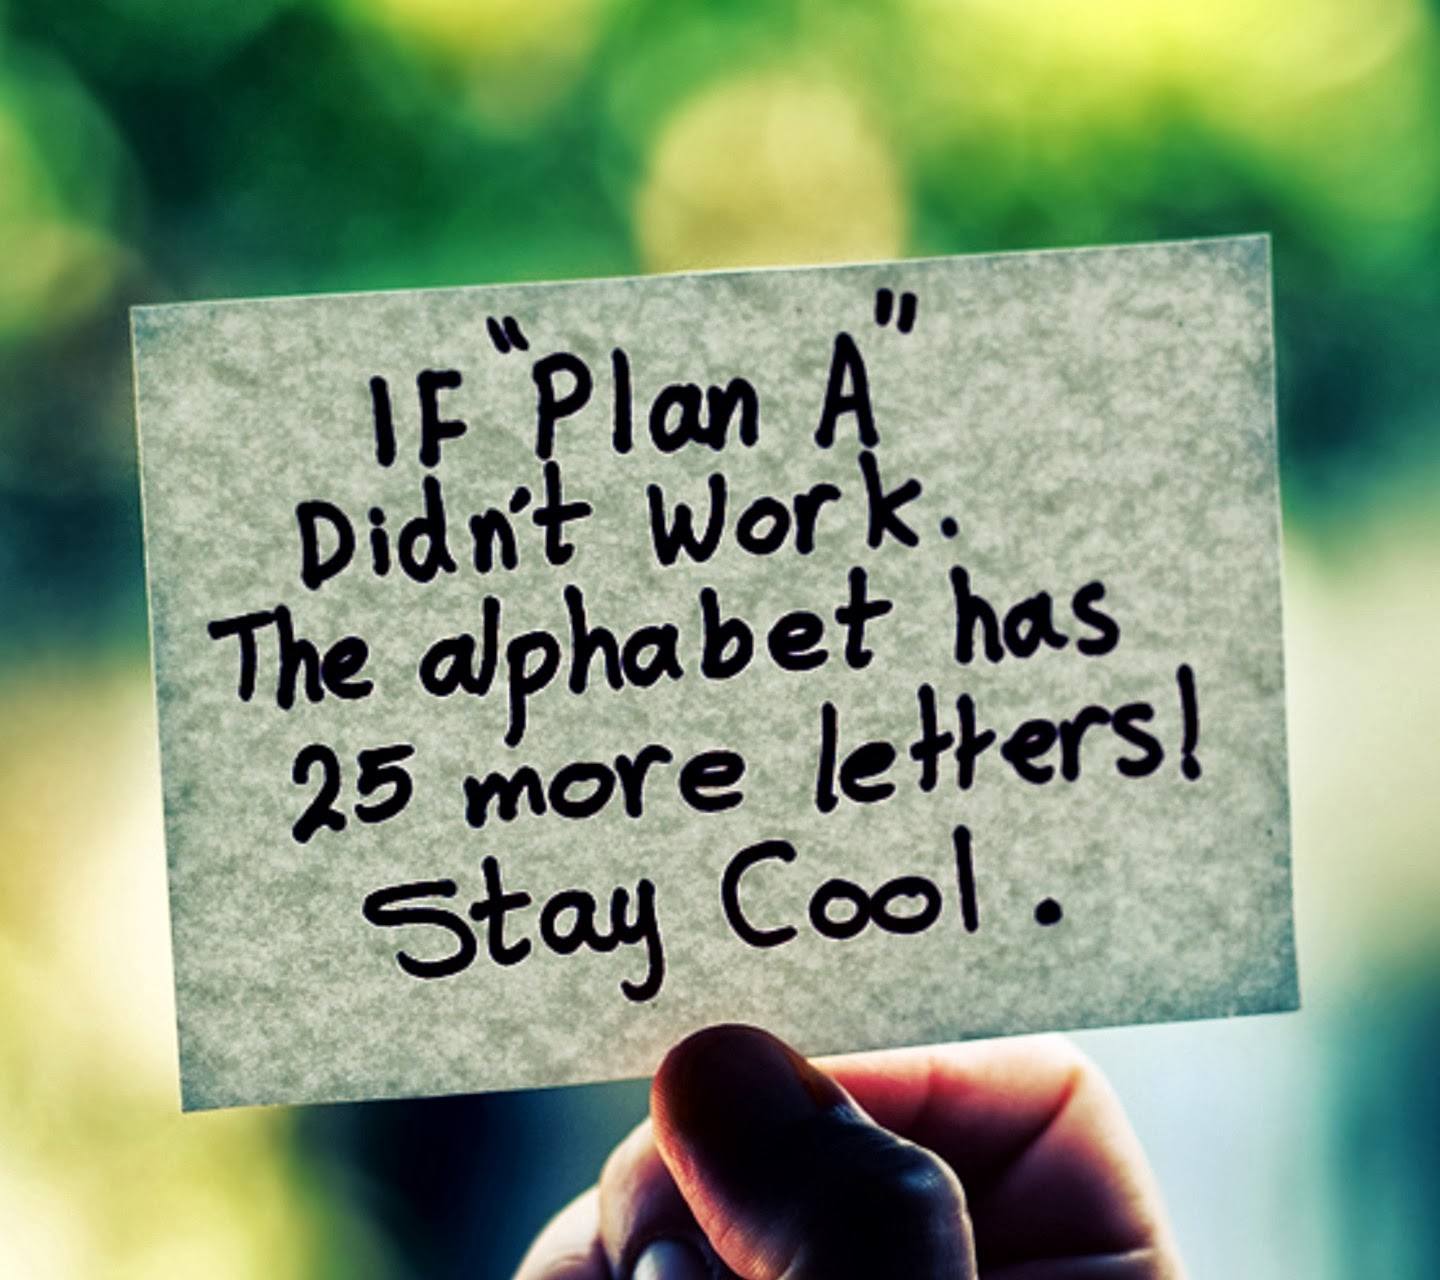 If ‘Plan A’ didn’t work, the alphabet has 25 more letters!